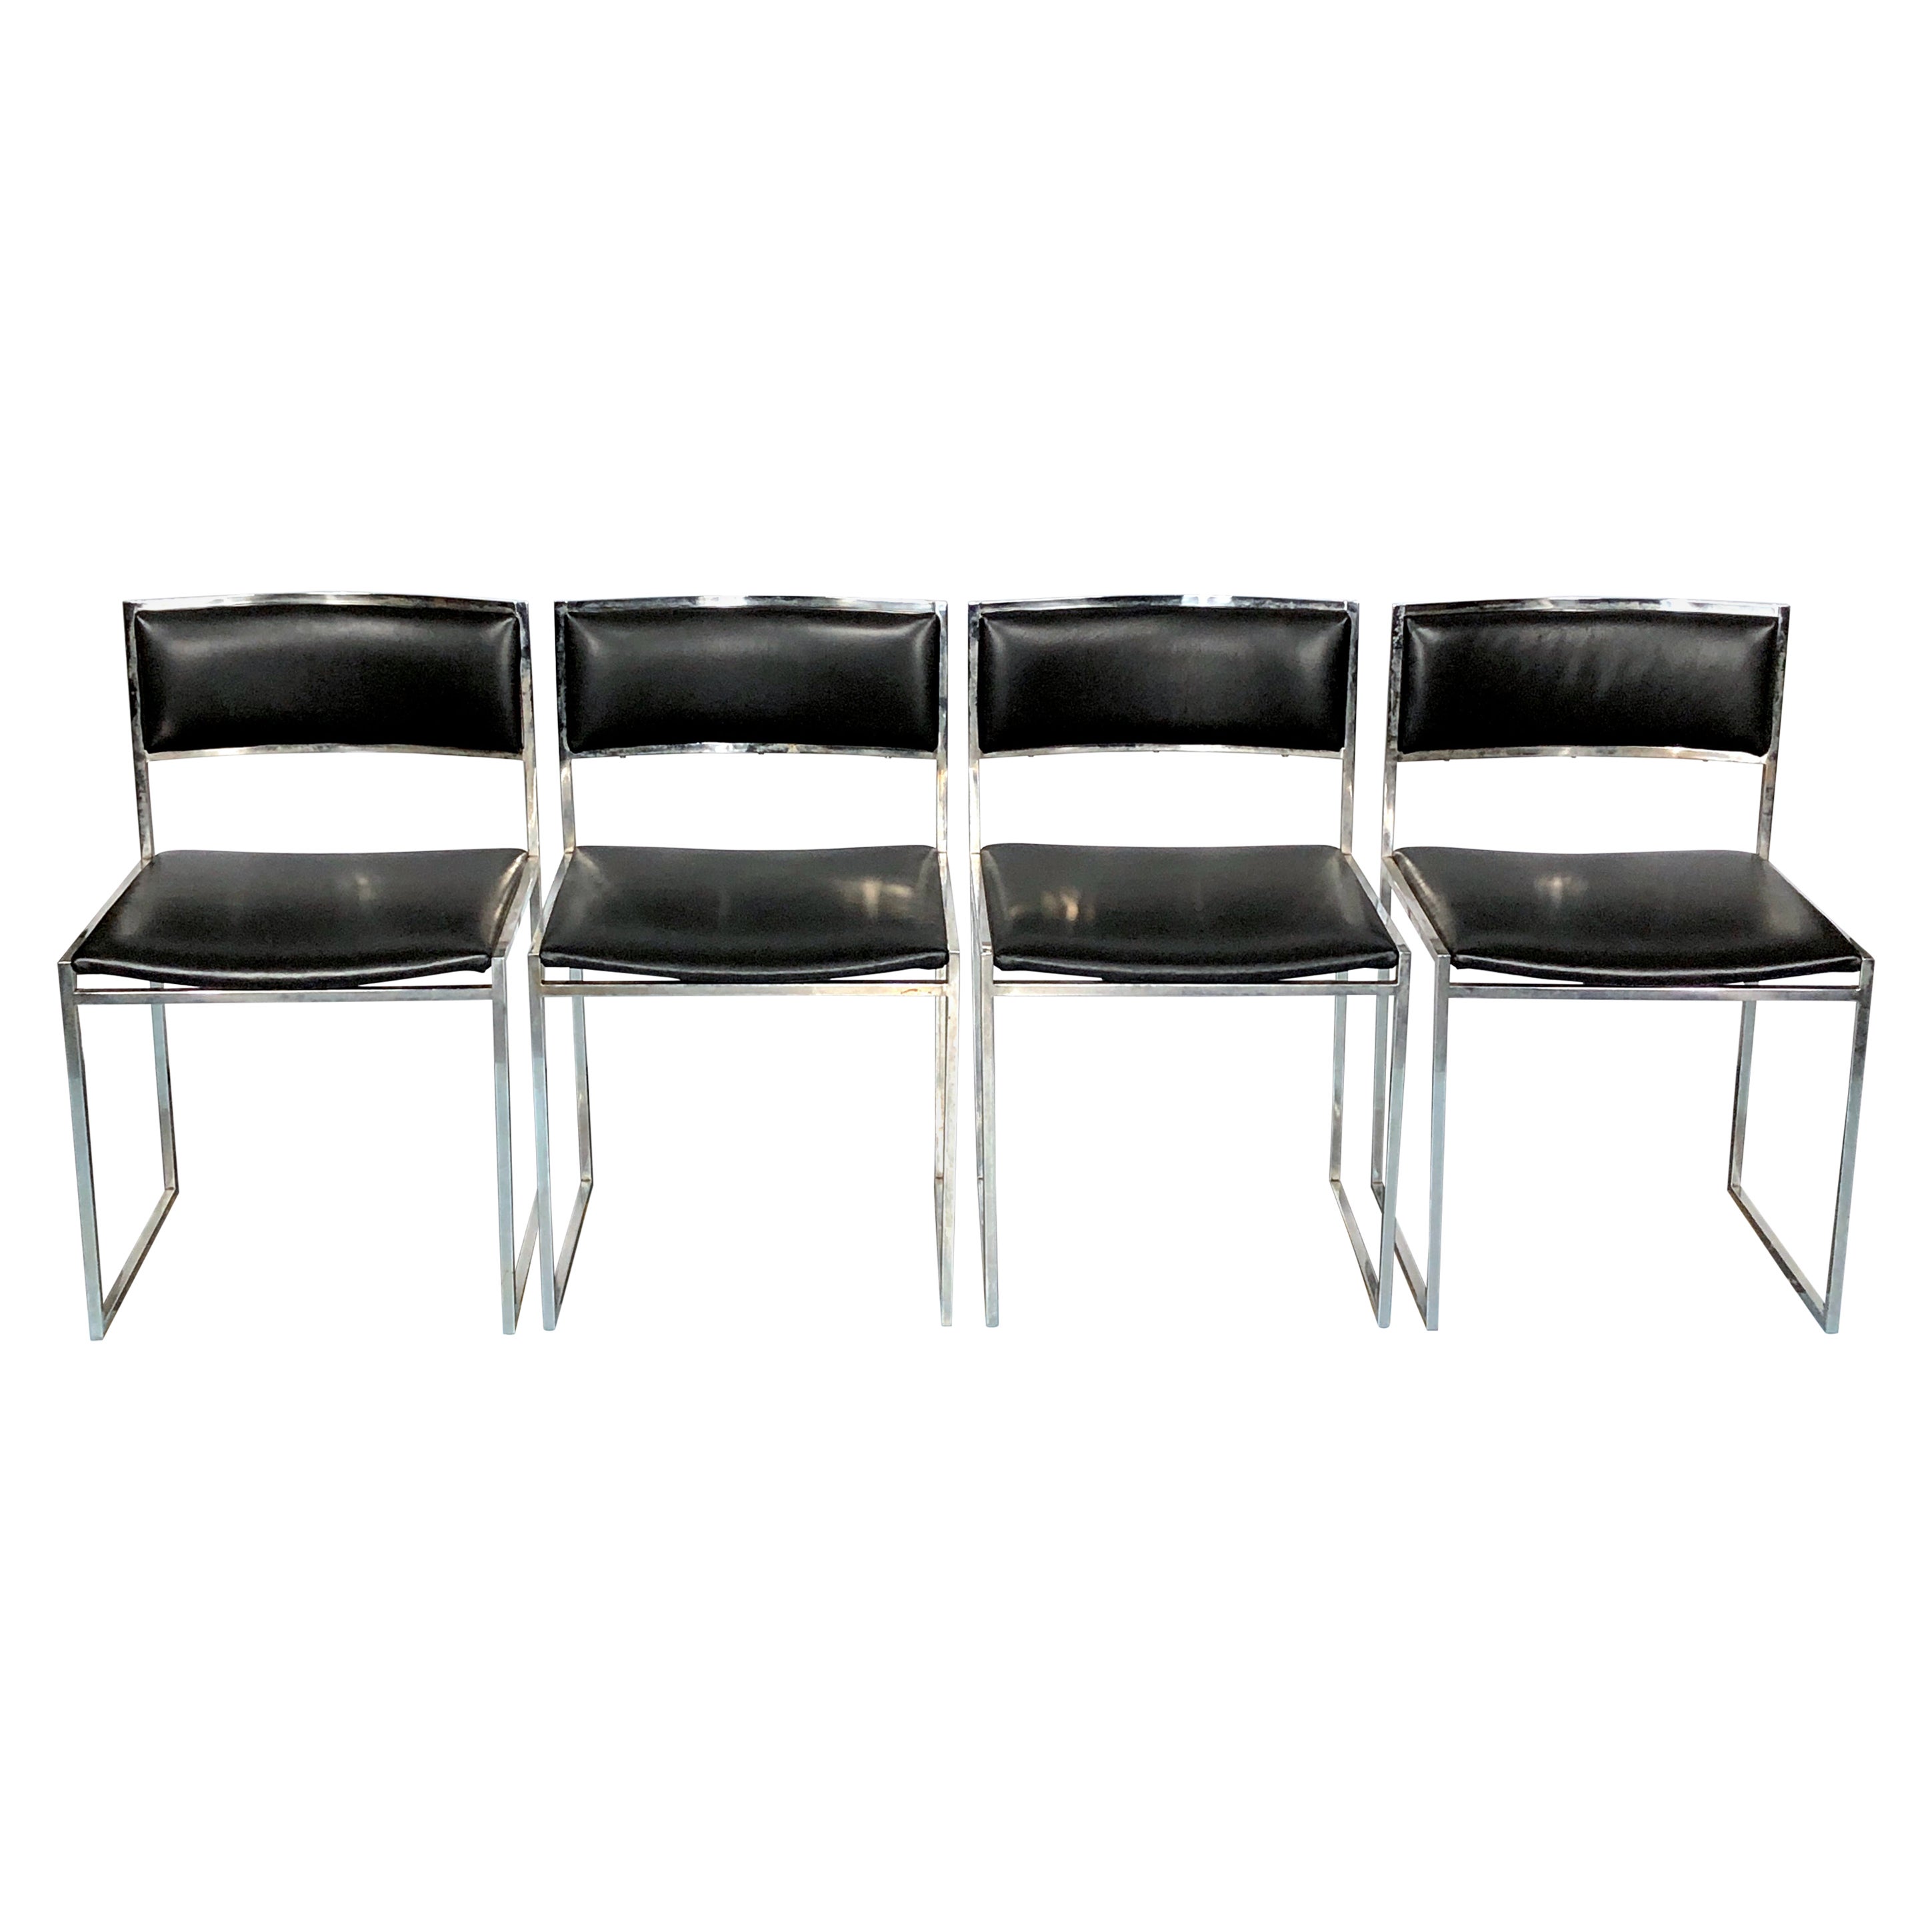 Romeo Rega, Set of Four Chrome and Leather Dining Chairs from 60s For Sale